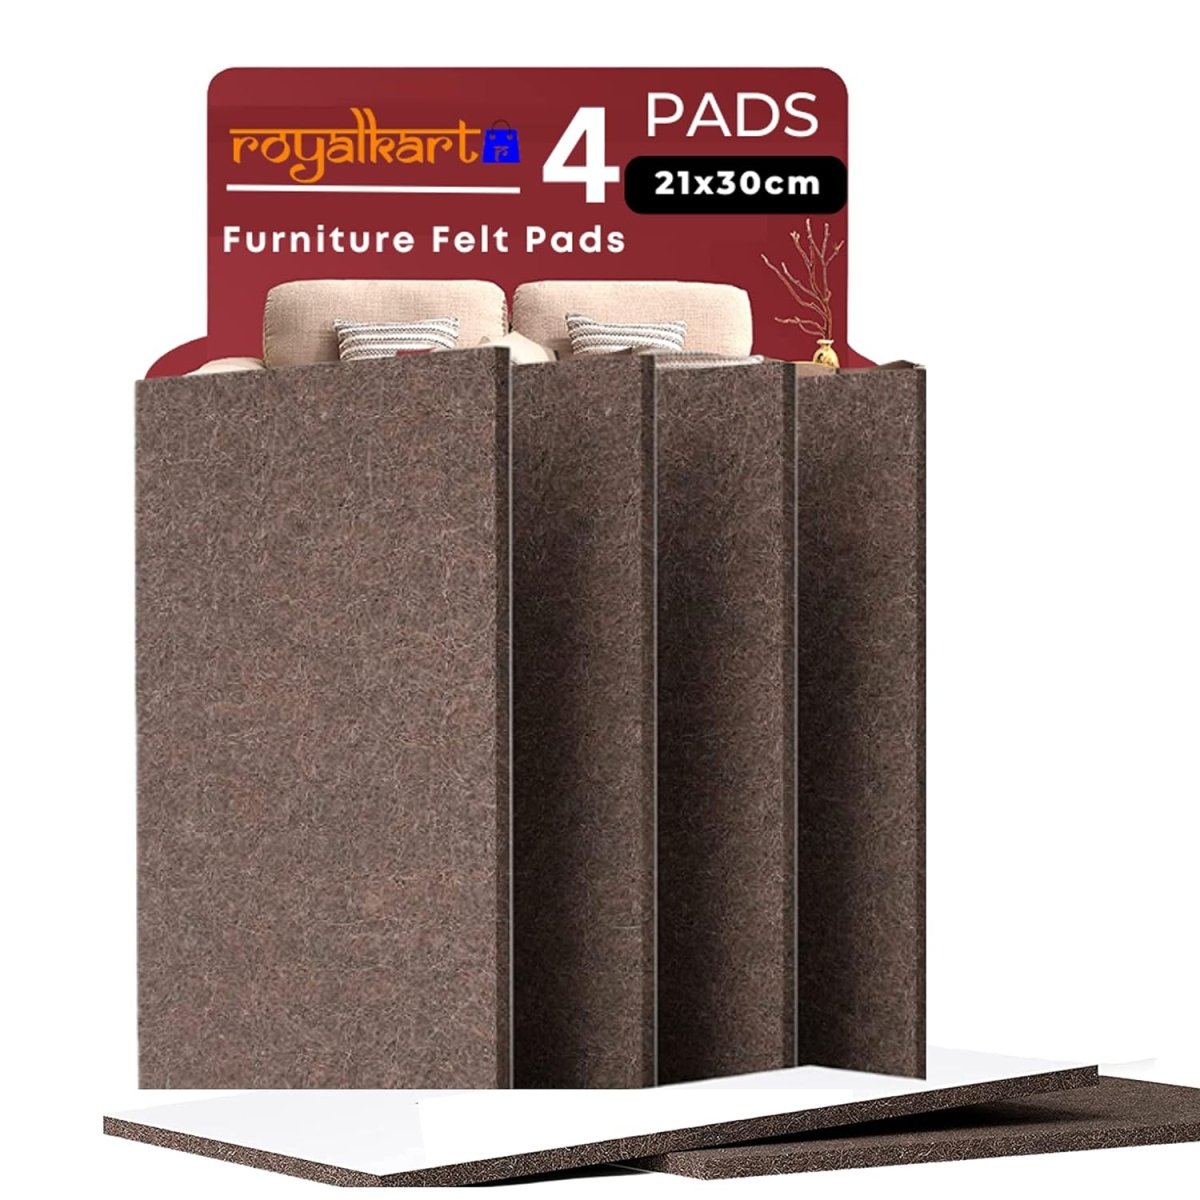 Furniture Felt Pad to protect your Floor from Scratch & Noise - 30x21cm furniture pads- #Royalkart#black furniture pad